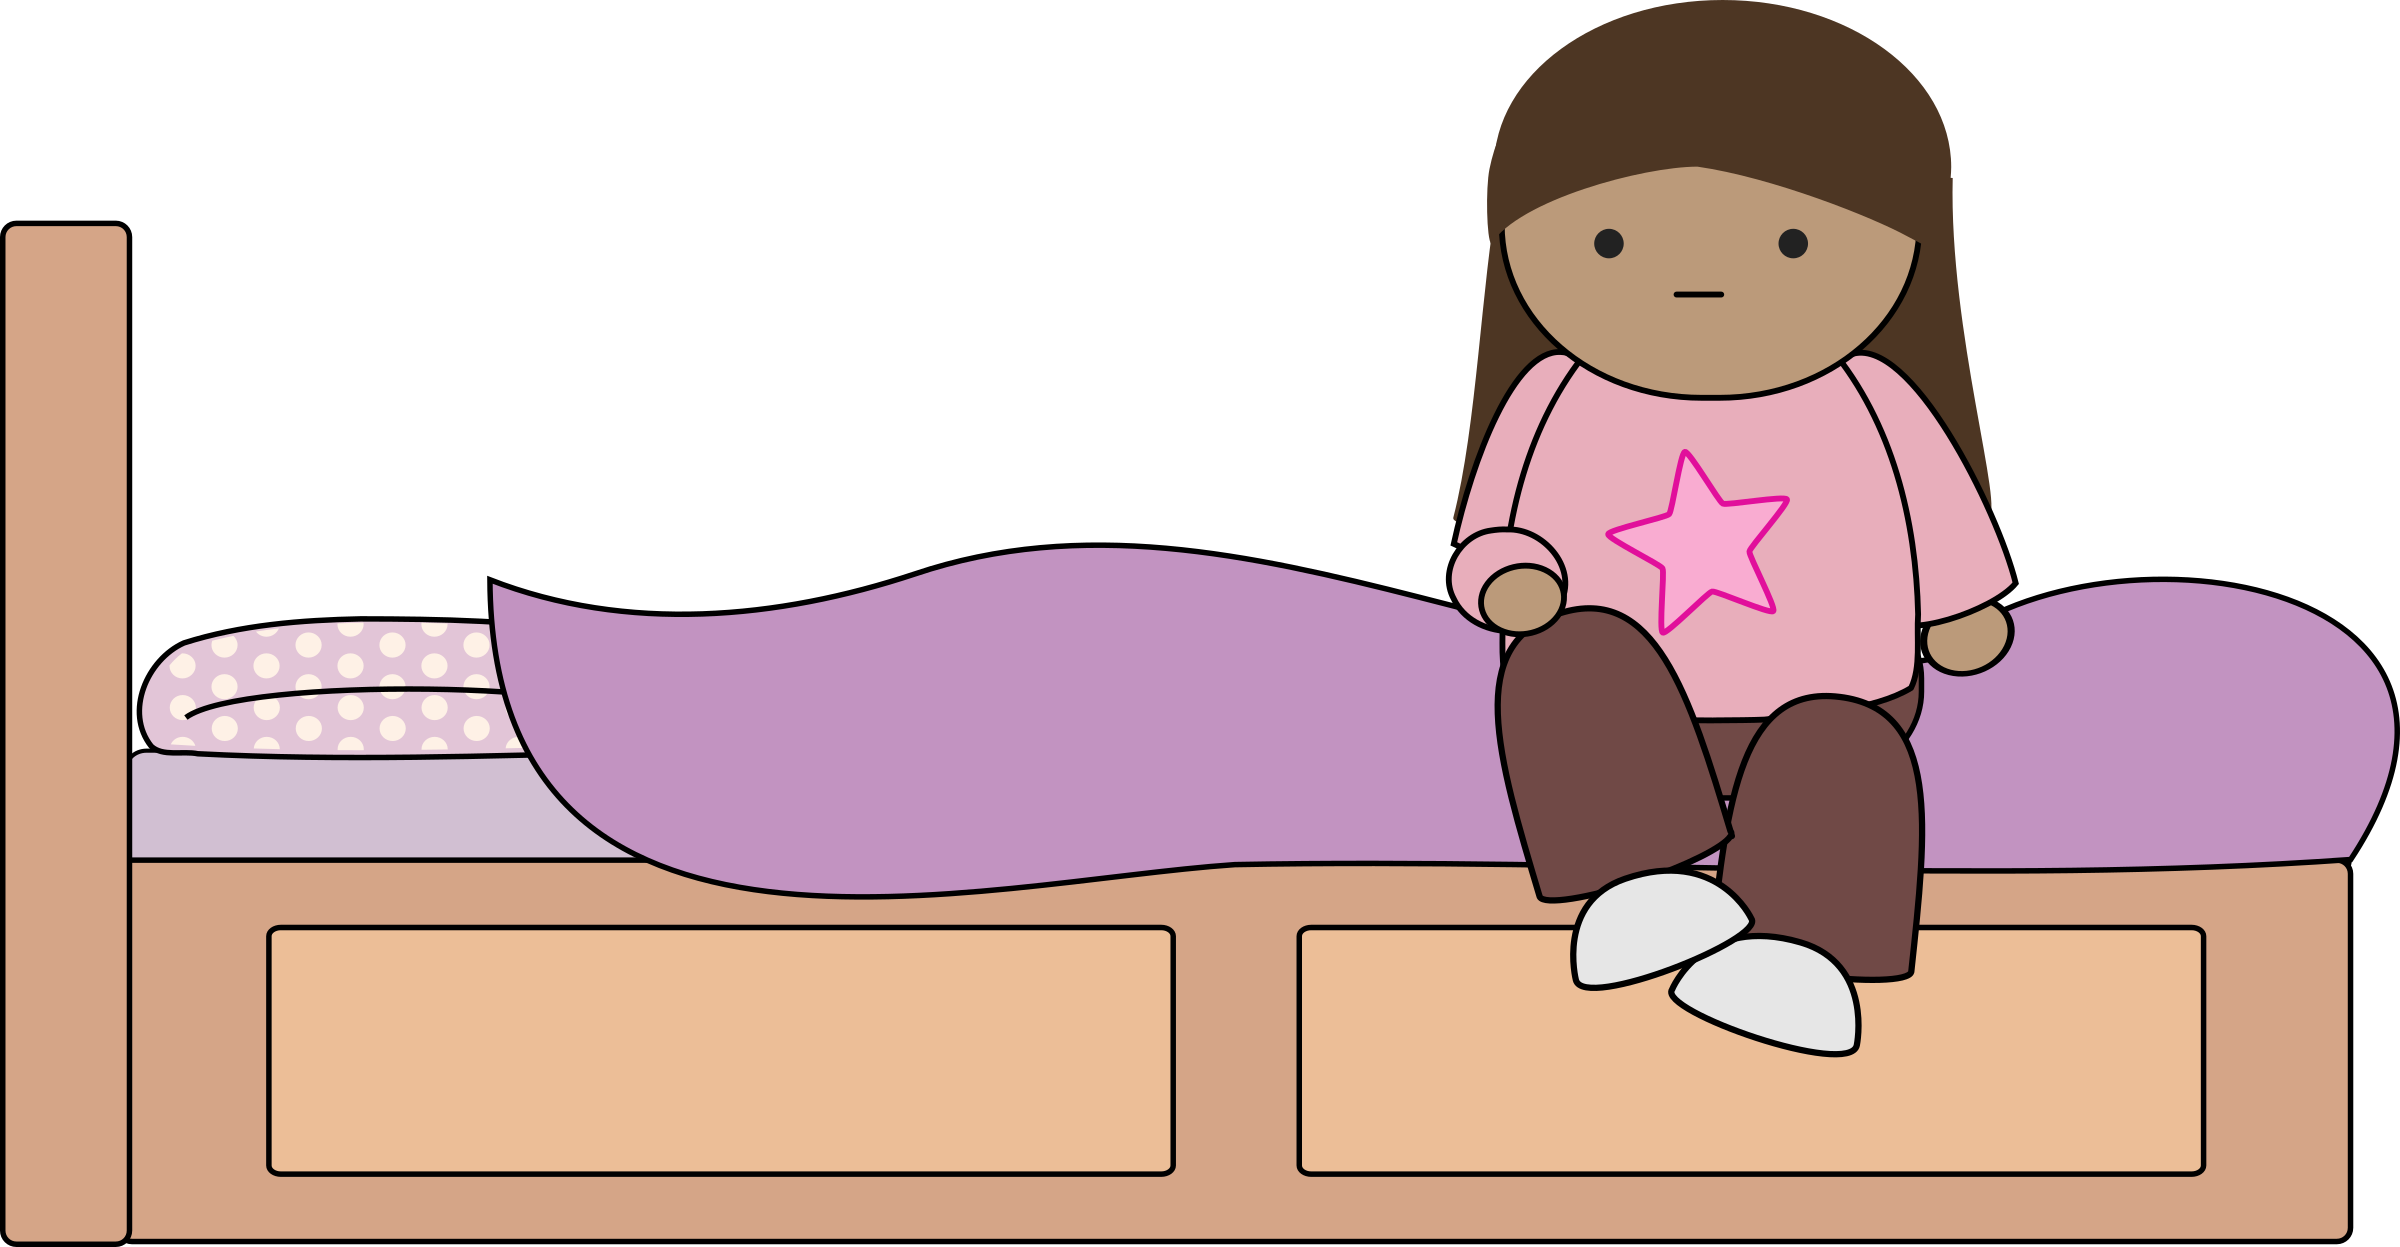 Sitting on the bed. Sit clipart cartoon